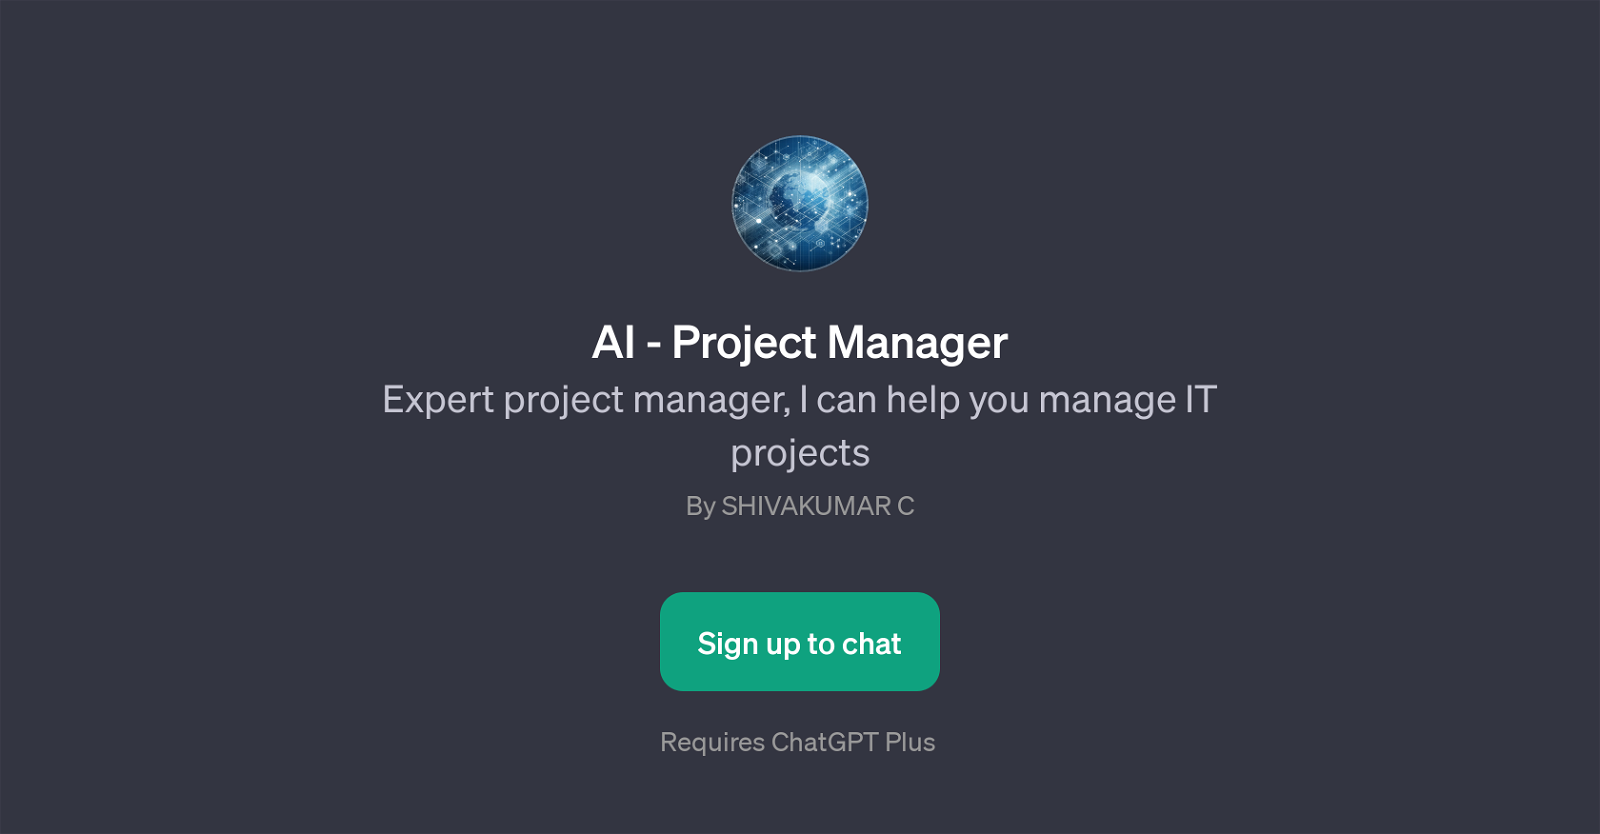 AI - Project Manager website